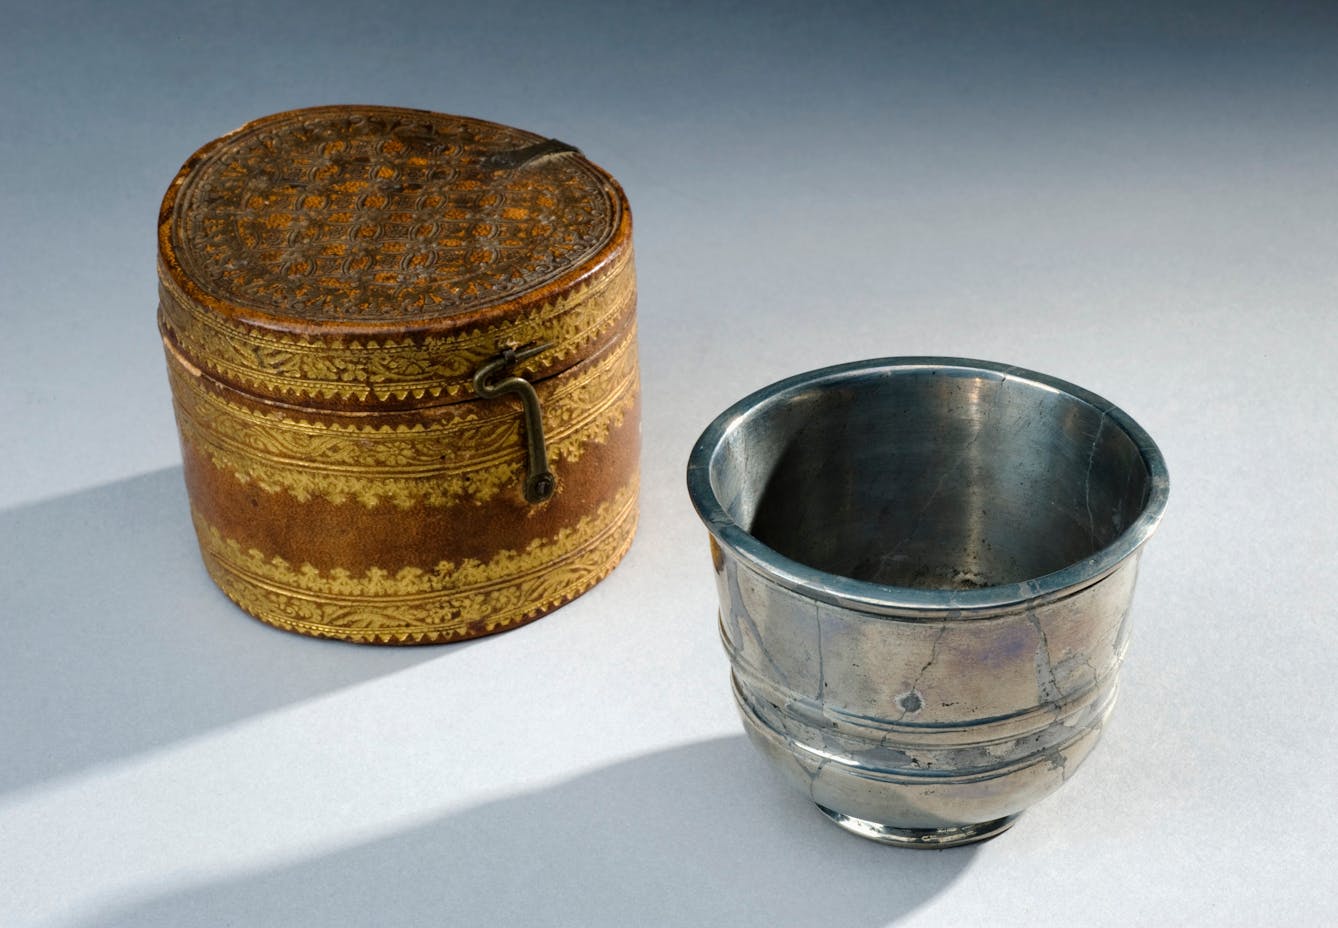 Antimony cup with leather case, Europe, 1601-1700